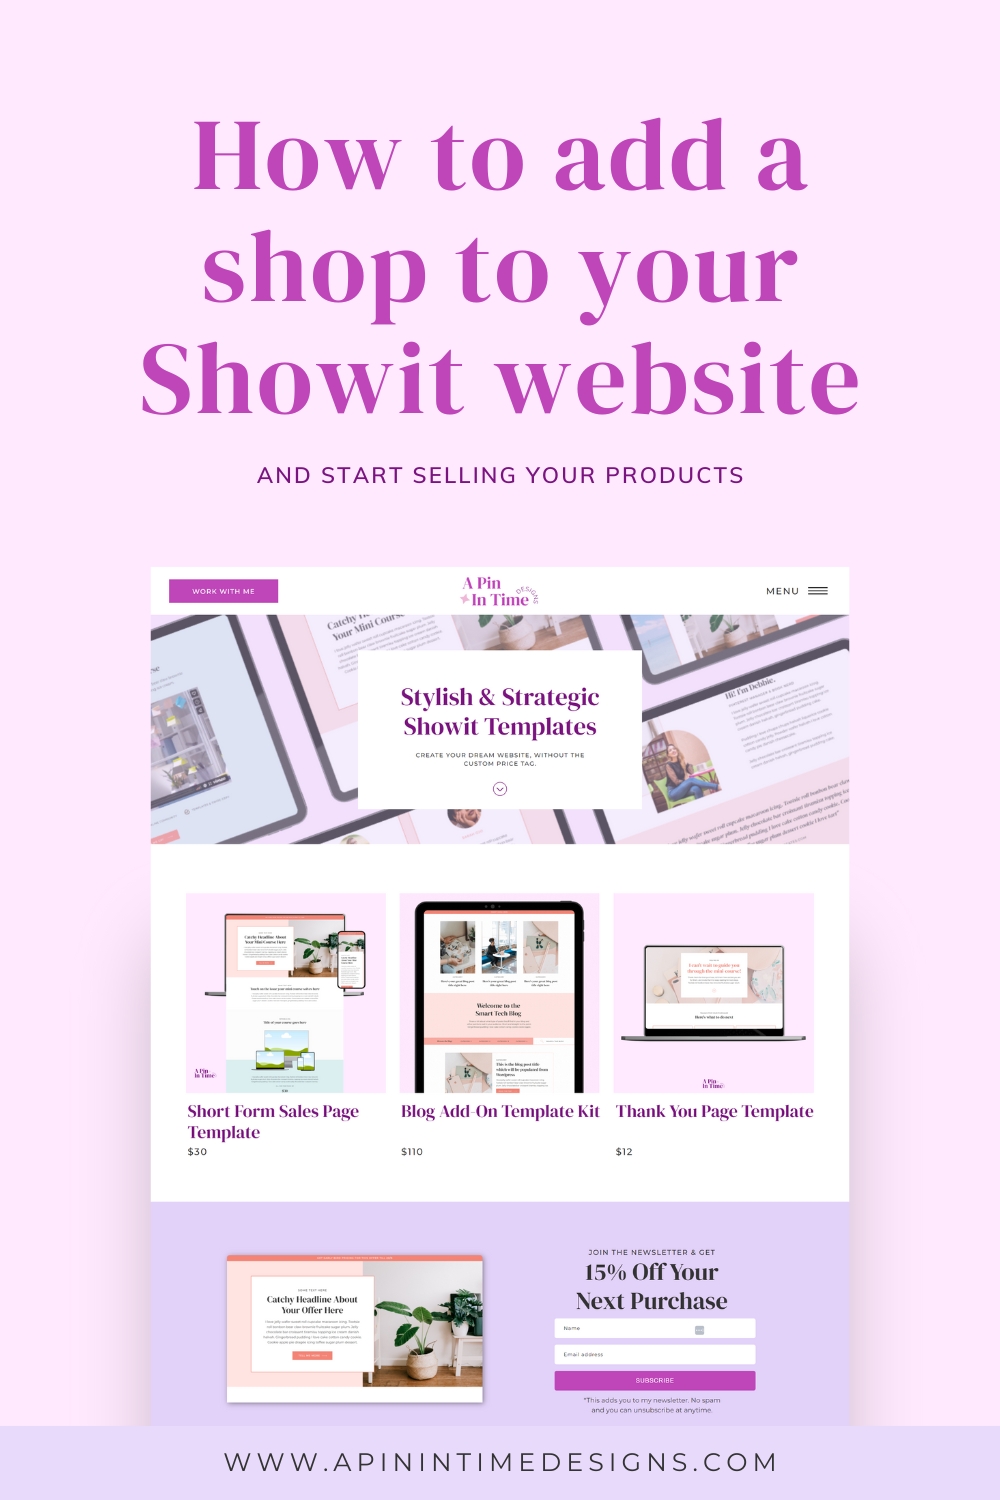 Pinterest image for this blog post on how to add an online shop to your Showit website